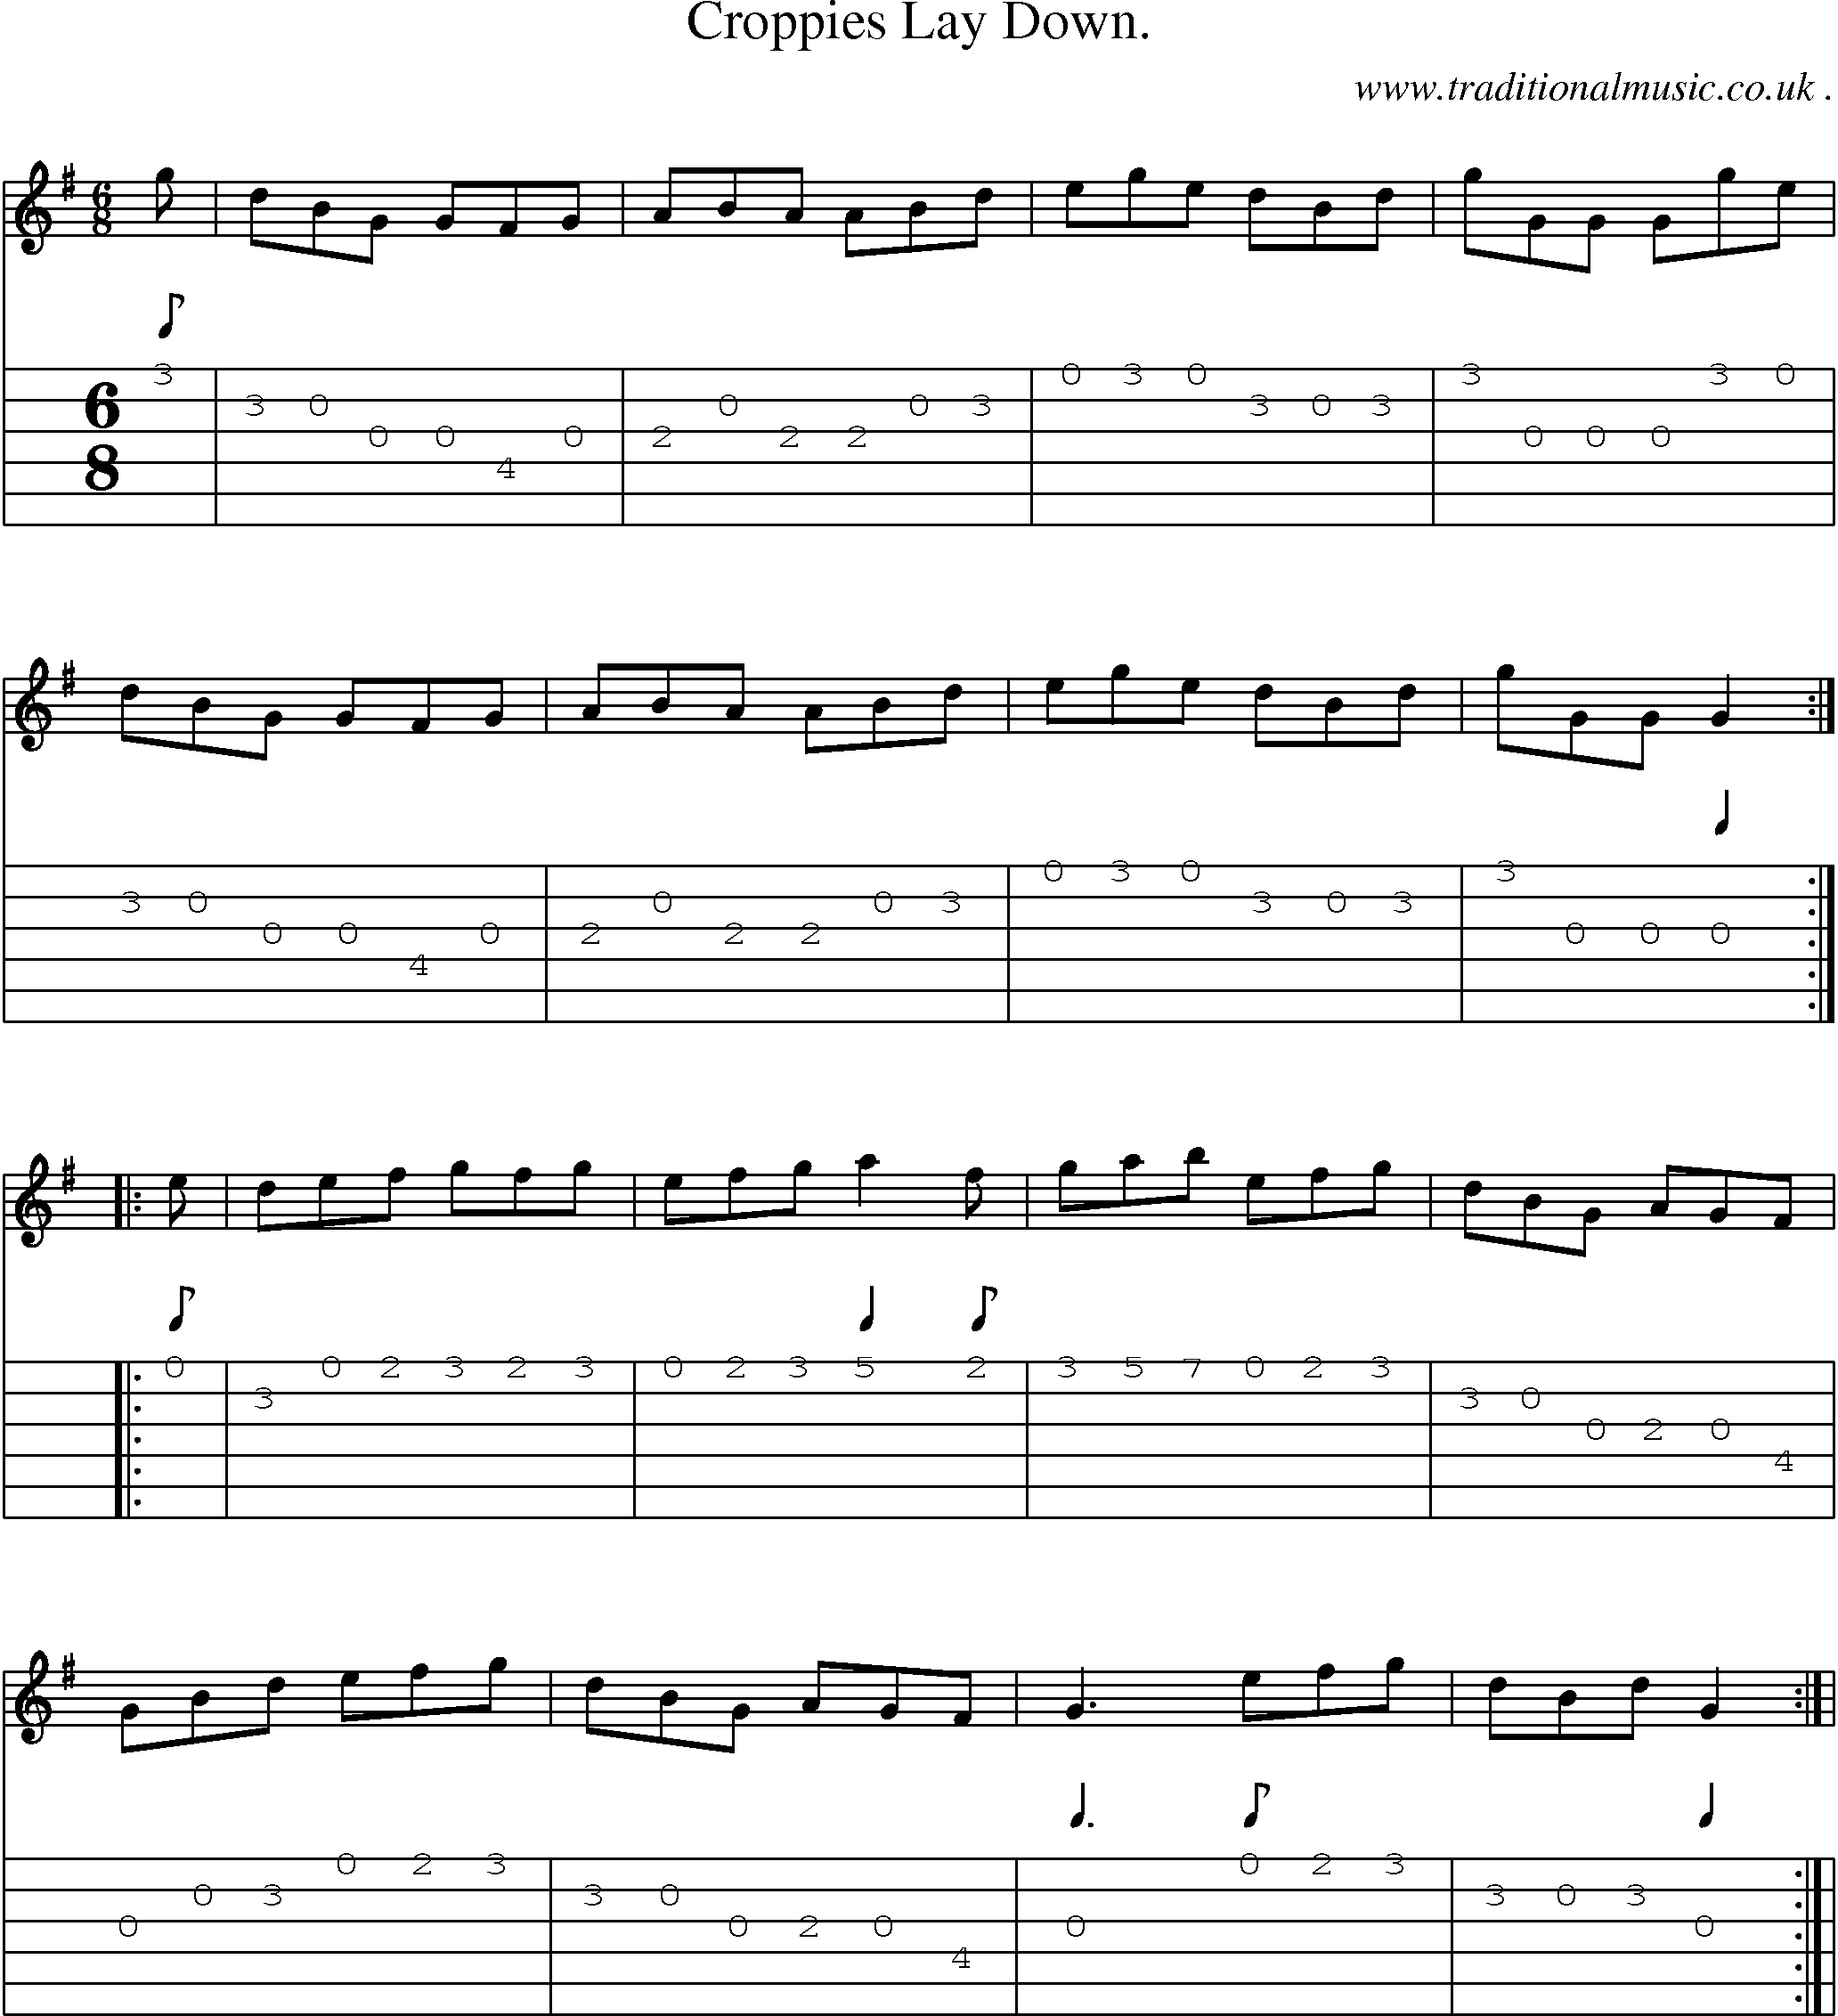 Sheet-Music and Guitar Tabs for Croppies Lay Down